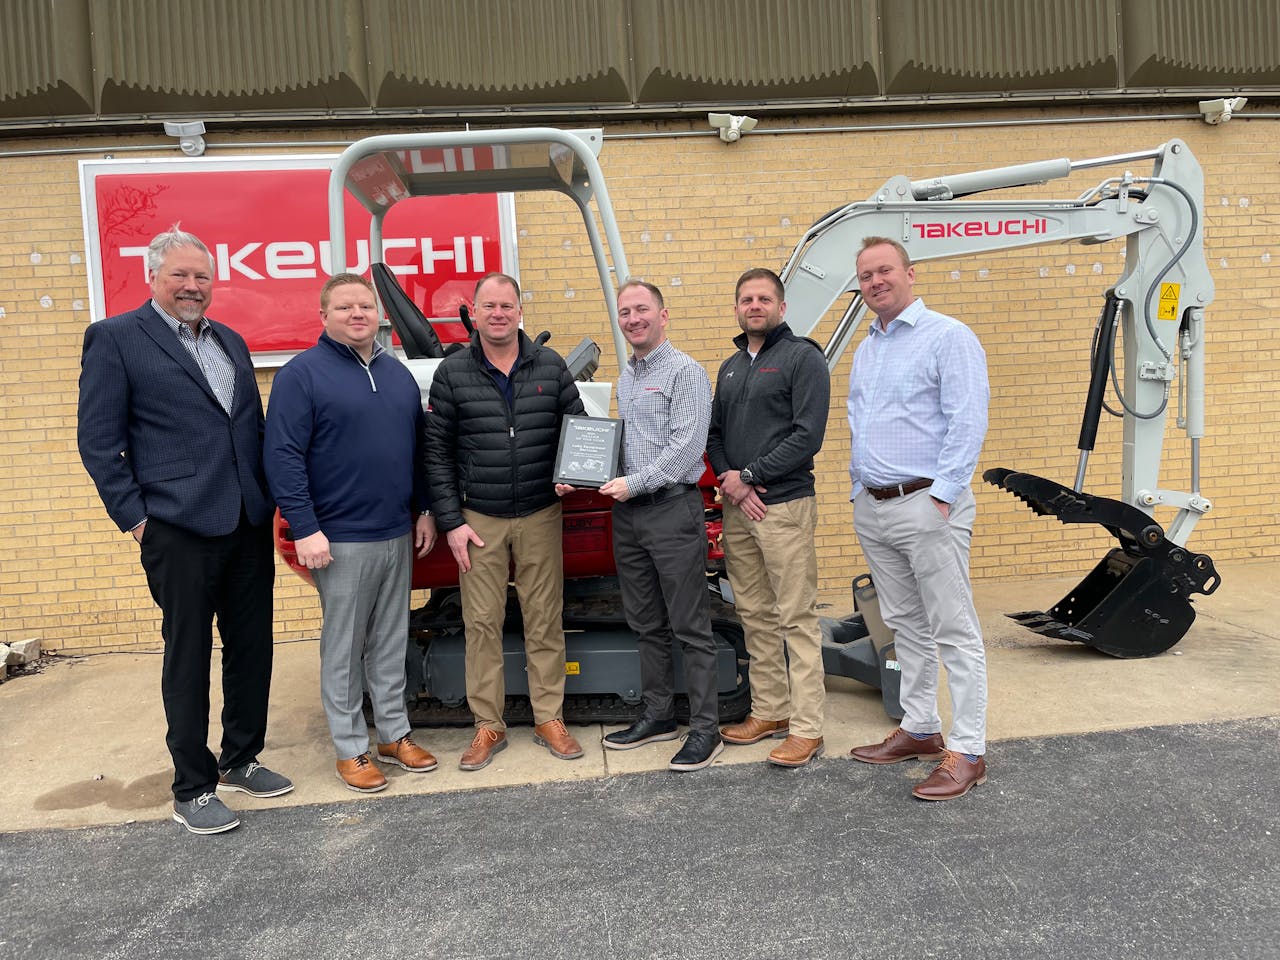 Takeuchi's Dealer of the Year for 2021, Luby Equipment